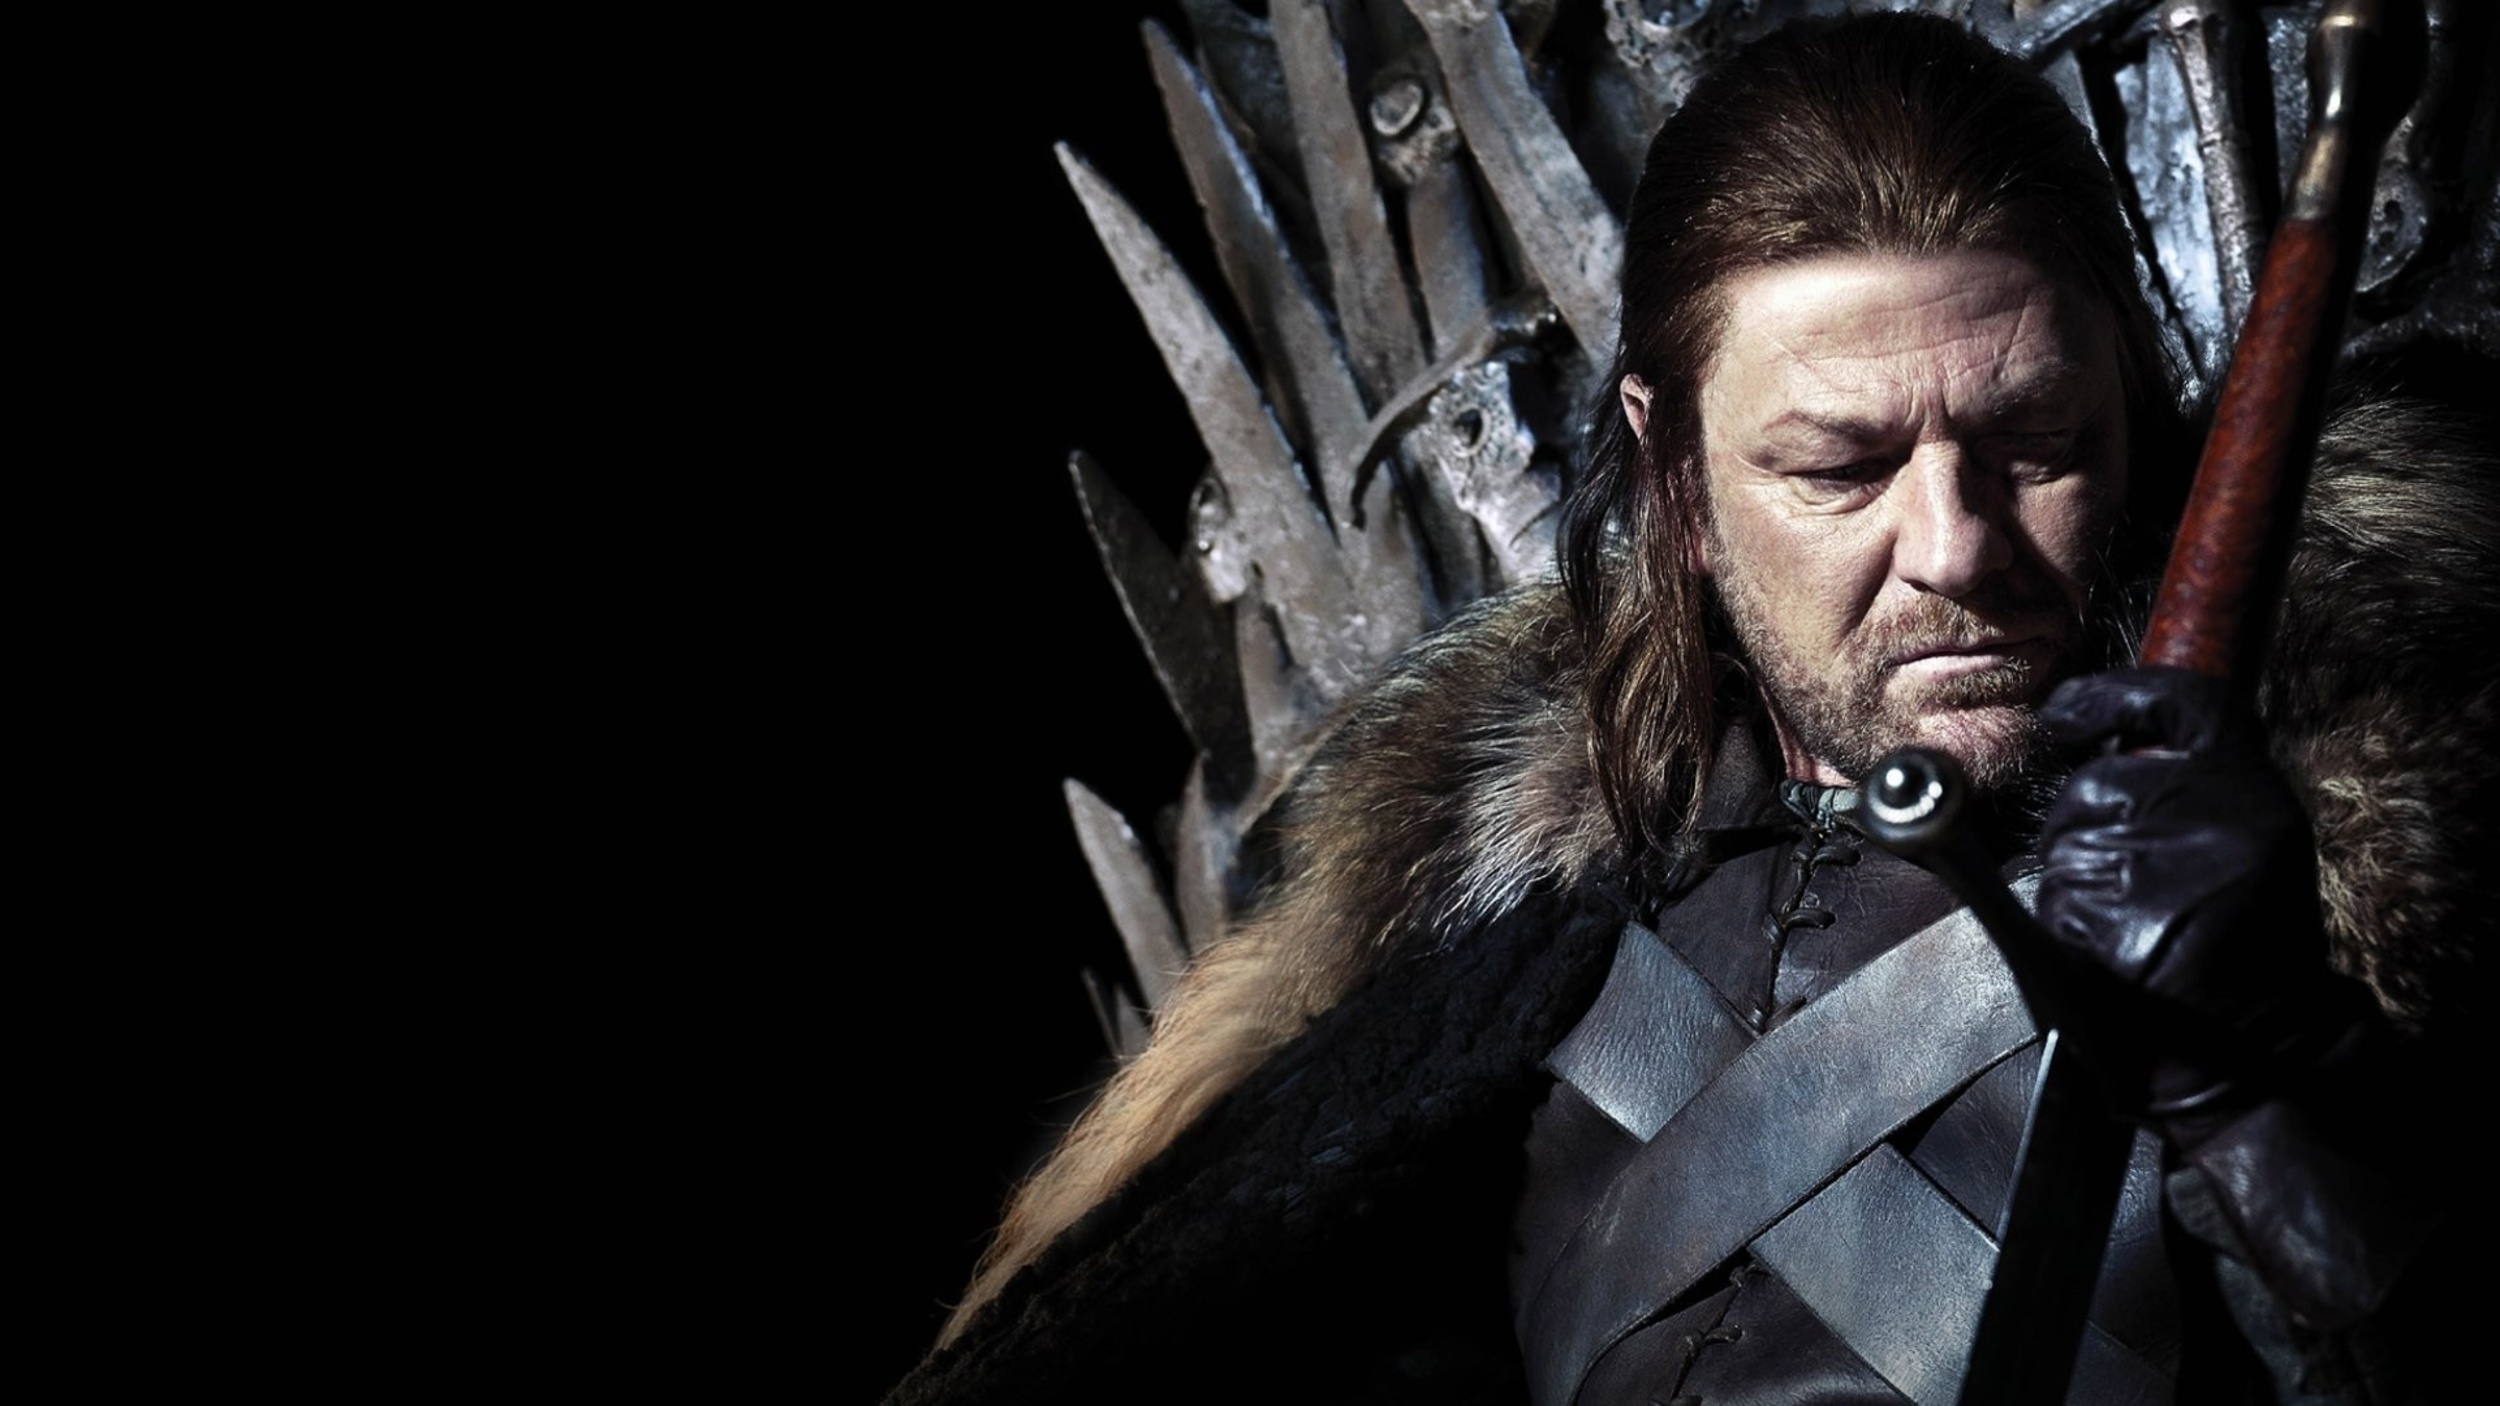 <p>Honestly, "Game of Thrones" fans don’t really know bad series finales if they think this is truly one of the “worst” of all time. But they’ve complained enough about it — you may have heard of <span><a href="https://www.change.org/p/hbo-remake-game-of-thrones-season-8-with-competent-writers" rel="noopener noreferrer">a little petition</a> </span>— that it makes the cut on a pure examination basis alone. But at the same time, to think that Bran winning the game of thrones and ending up king is a good idea — or good story — is a disaster in its own right.</p><p>You may also like: <a href='https://www.yardbarker.com/entertainment/articles/25_movies_that_will_really_mess_with_your_head_013124/s1__39060406'>25 movies that will really mess with your head</a></p>